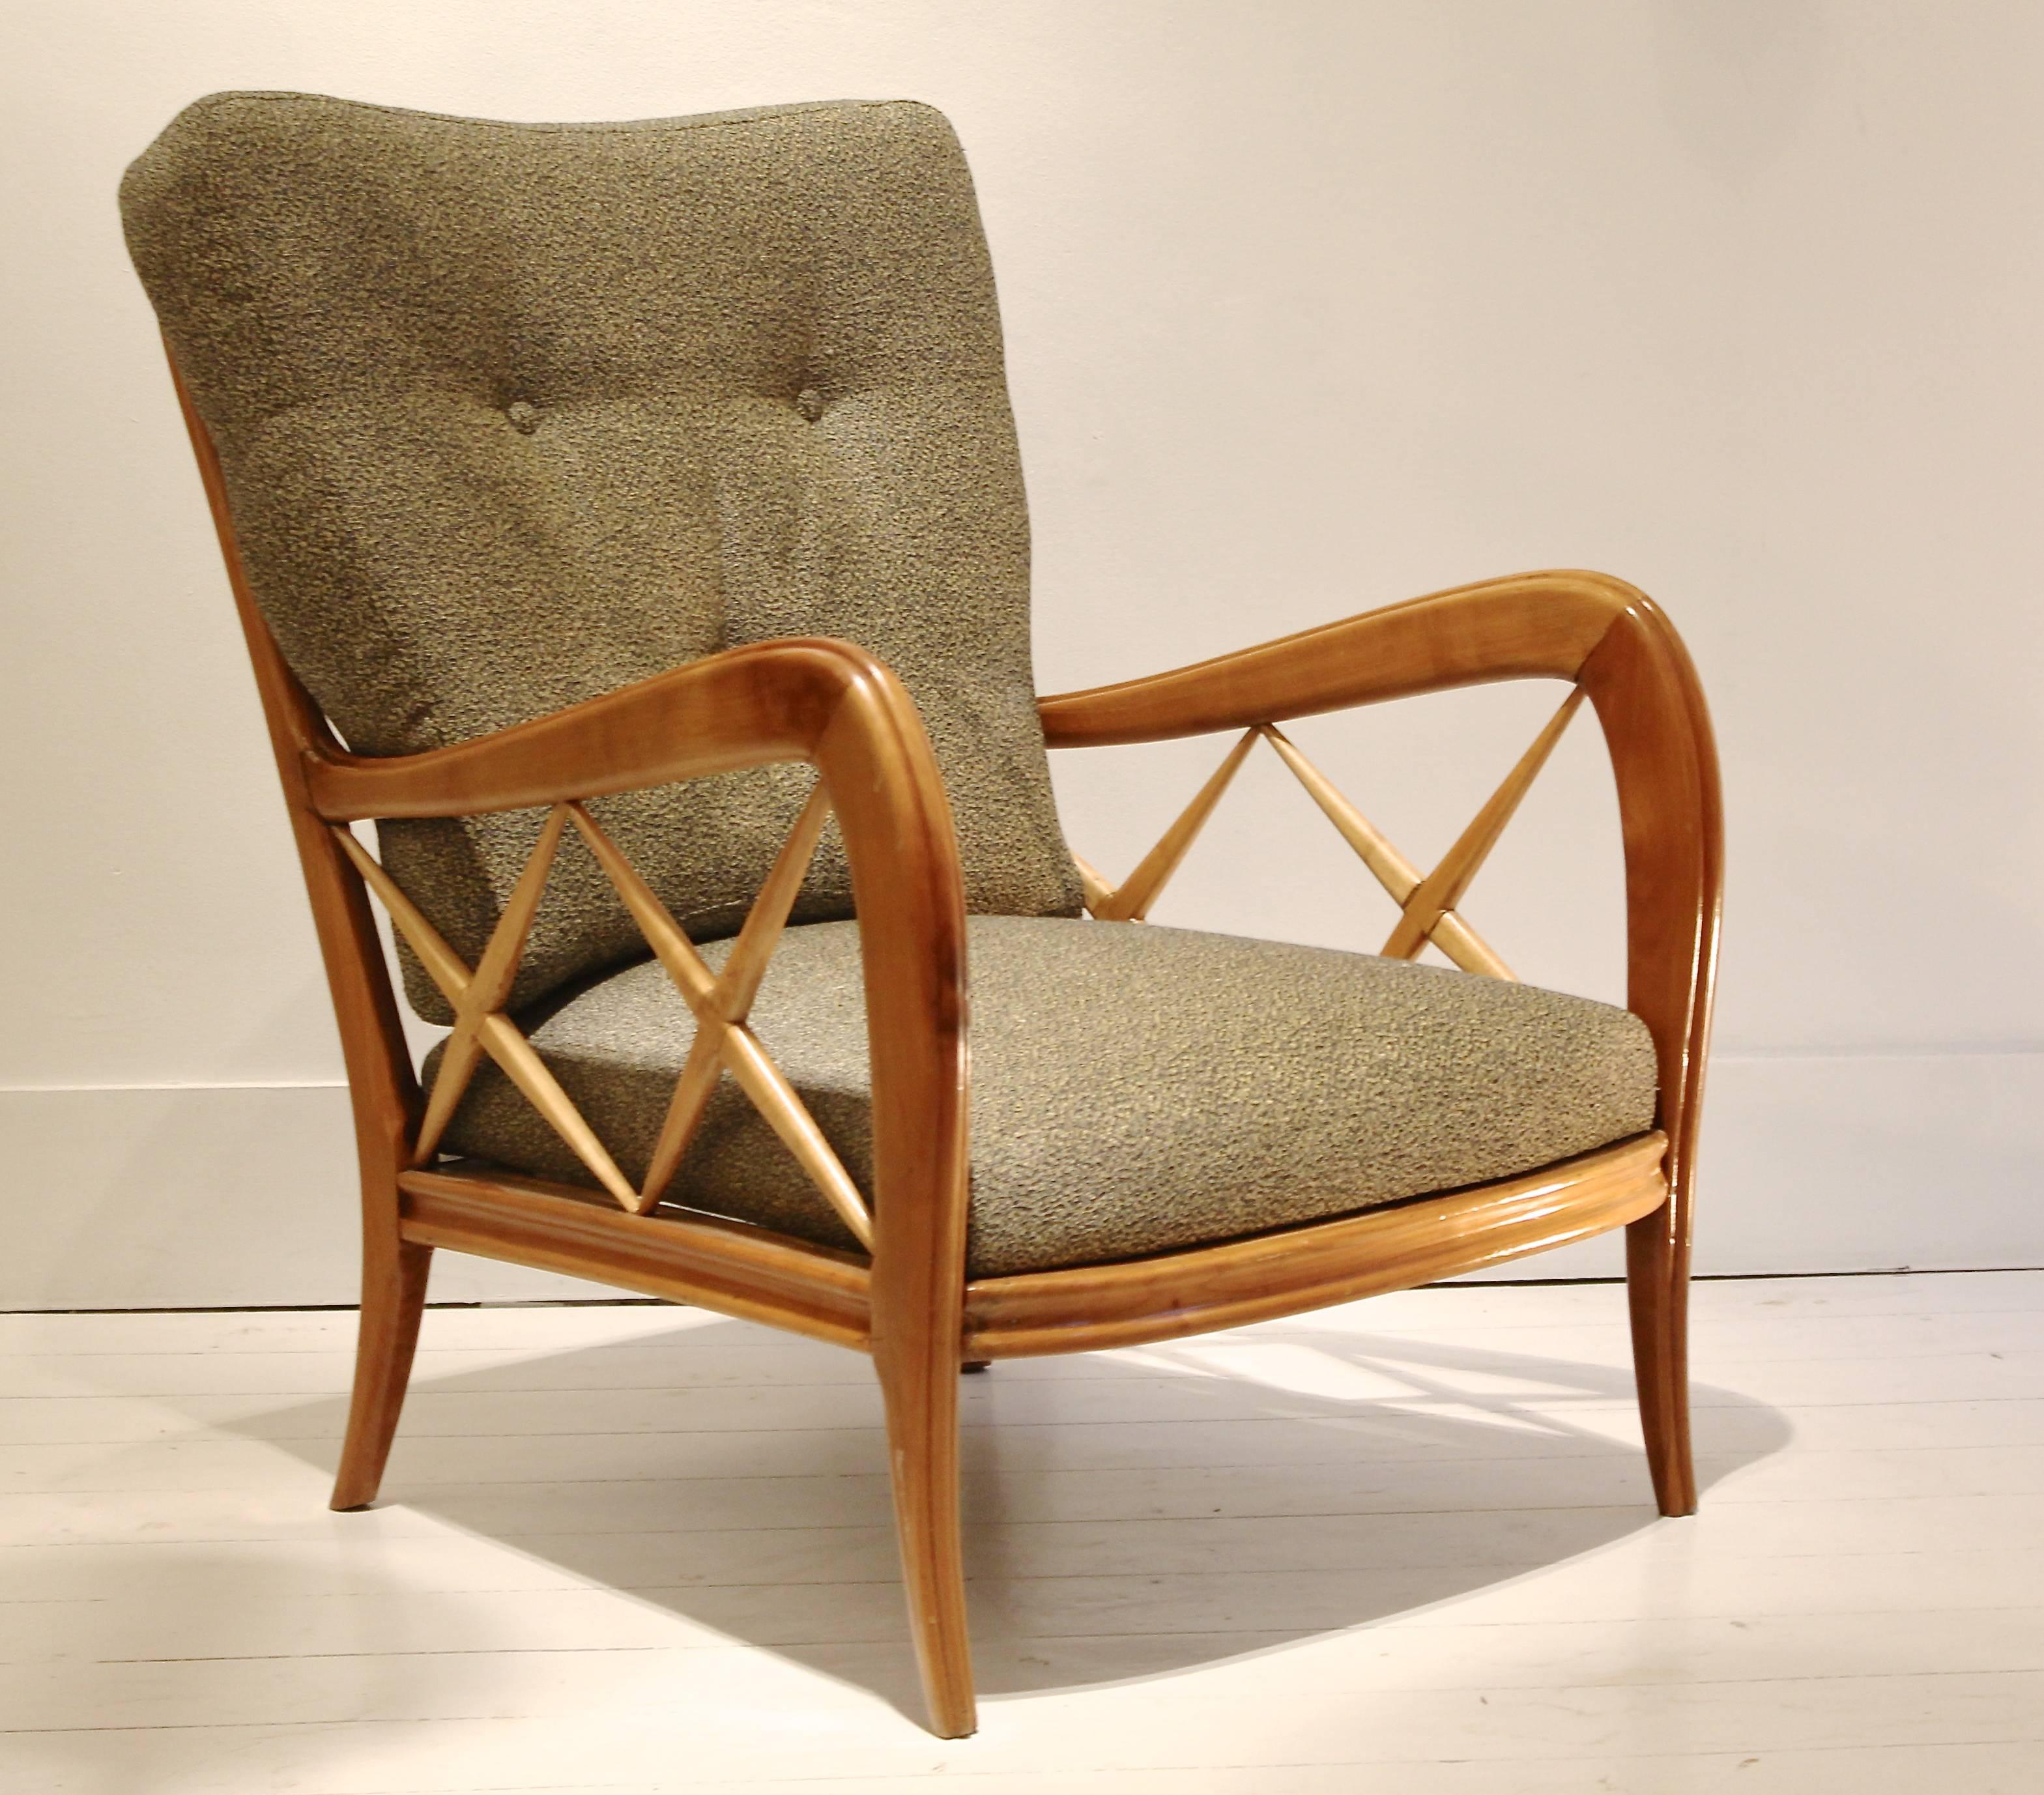 Pair of 1940s Paolo Buffa cherrywood armchairs, newly upholstered using Pierre Frey Paris fabric.